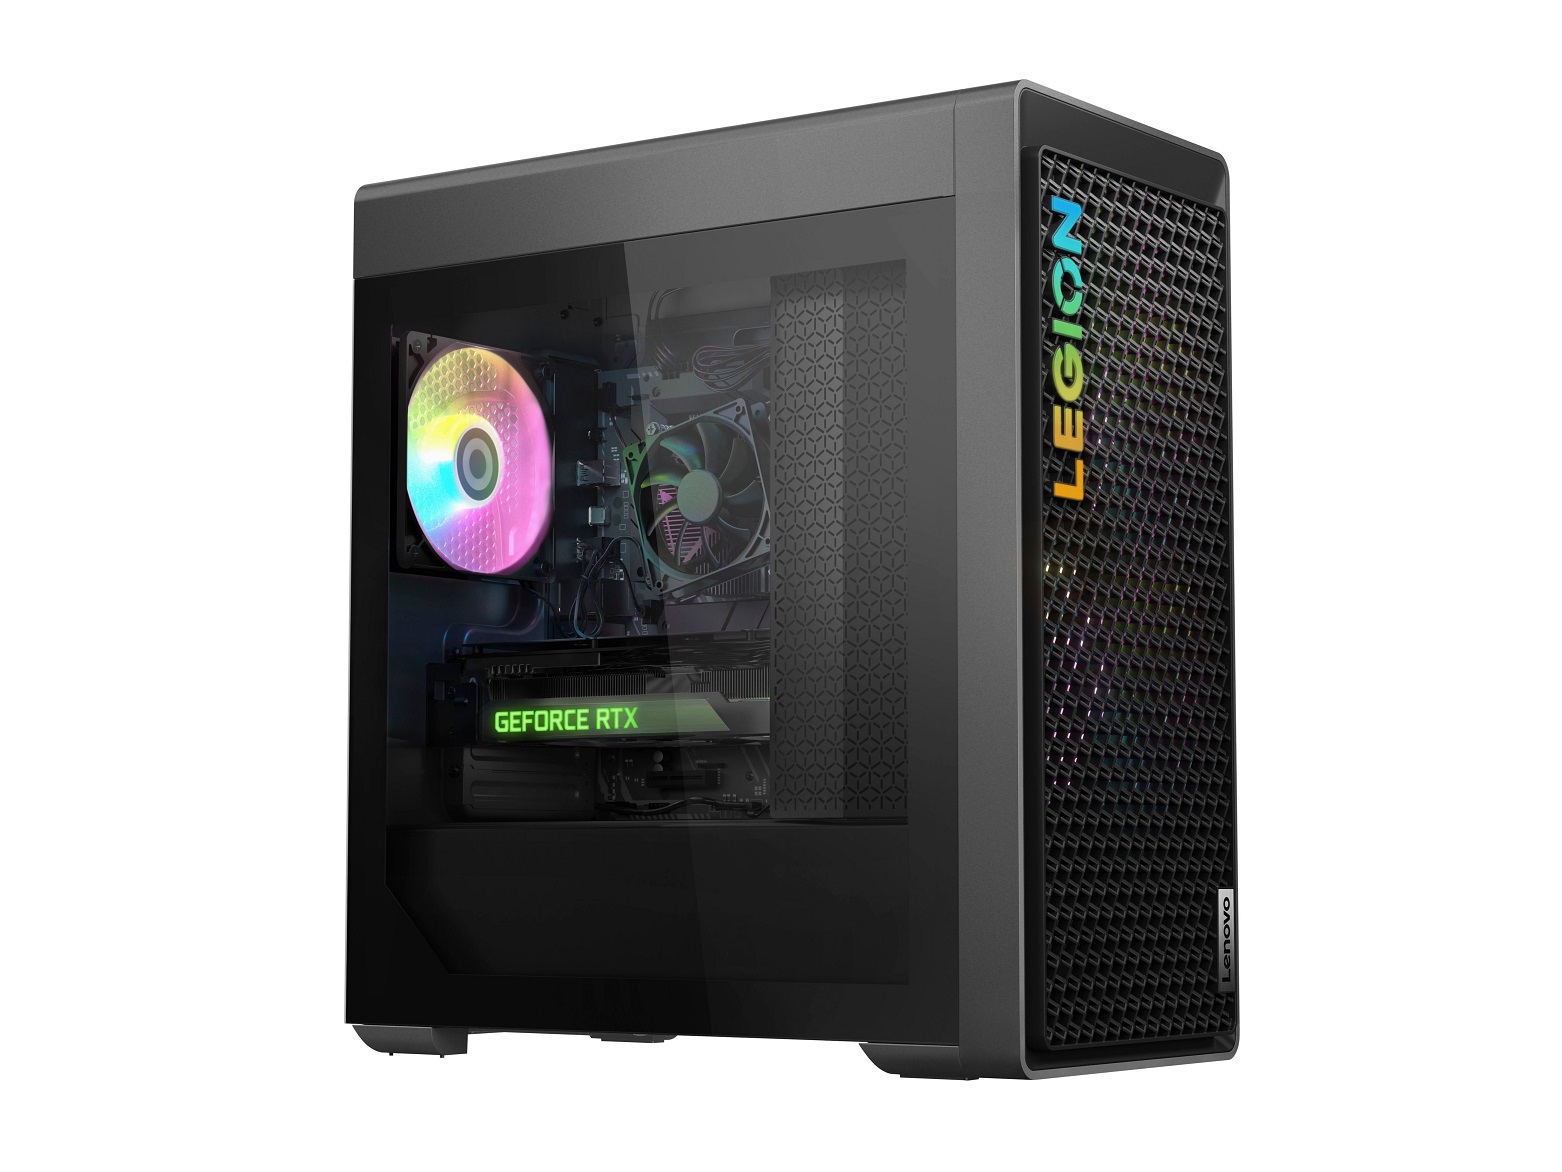 https://www.digitaltrends.com/wp-content/uploads/2023/12/Lenovo-Legion-Tower-5i-with-RTX-3060-gifts-for-PC-gamers.jpg?fit=720%2C540&p=1